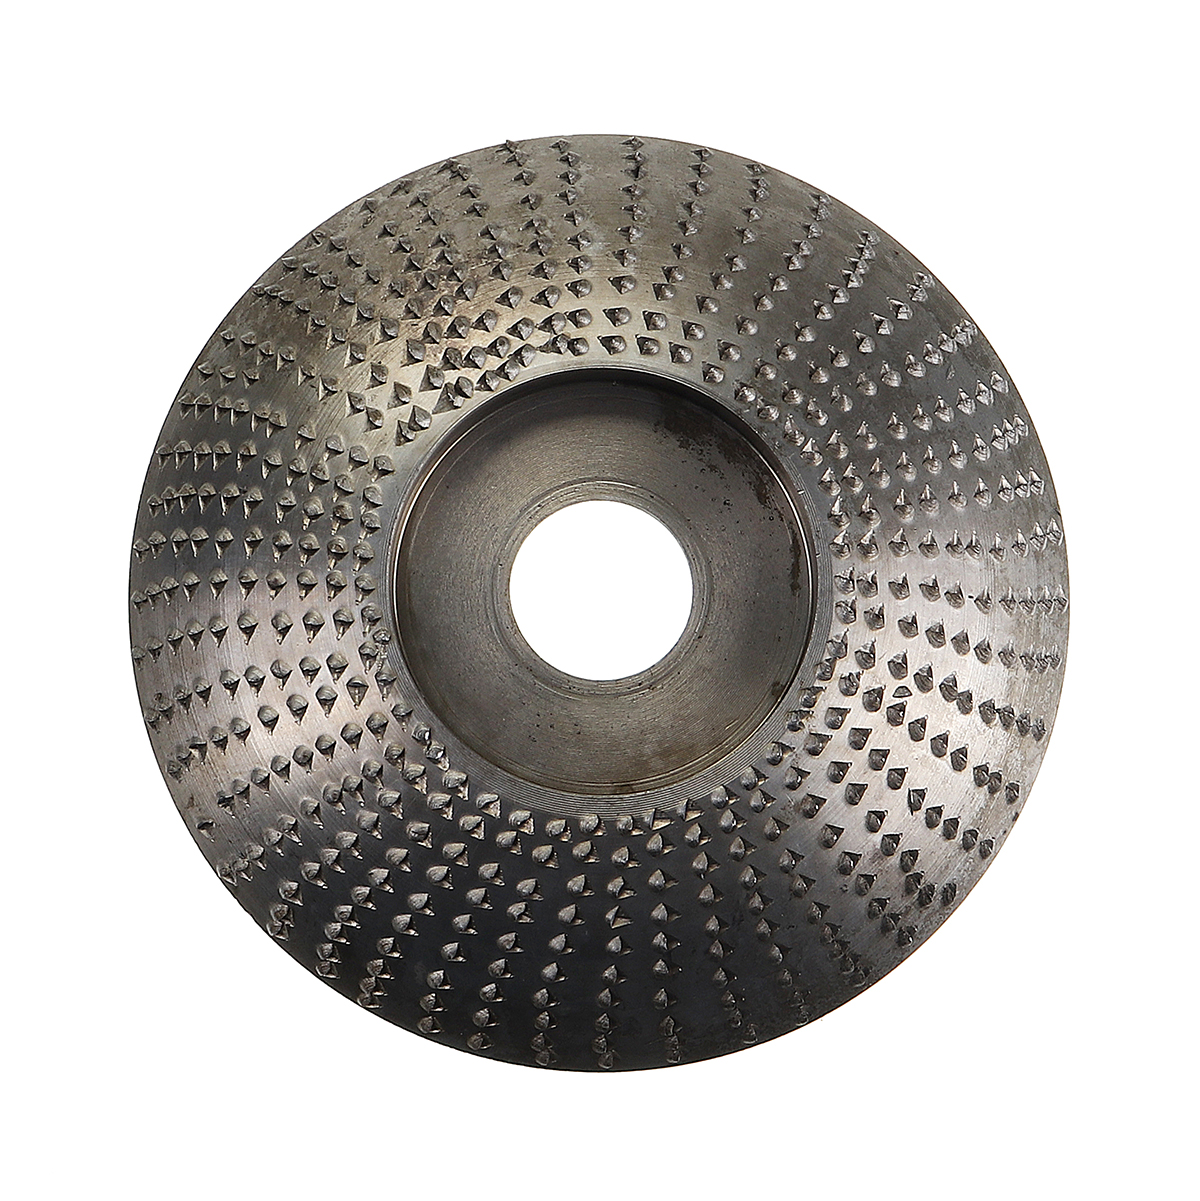 

84mm Carbide Wood Sanding Disc Carving Shaping Disc for Angle Grinder Grinding Wheel